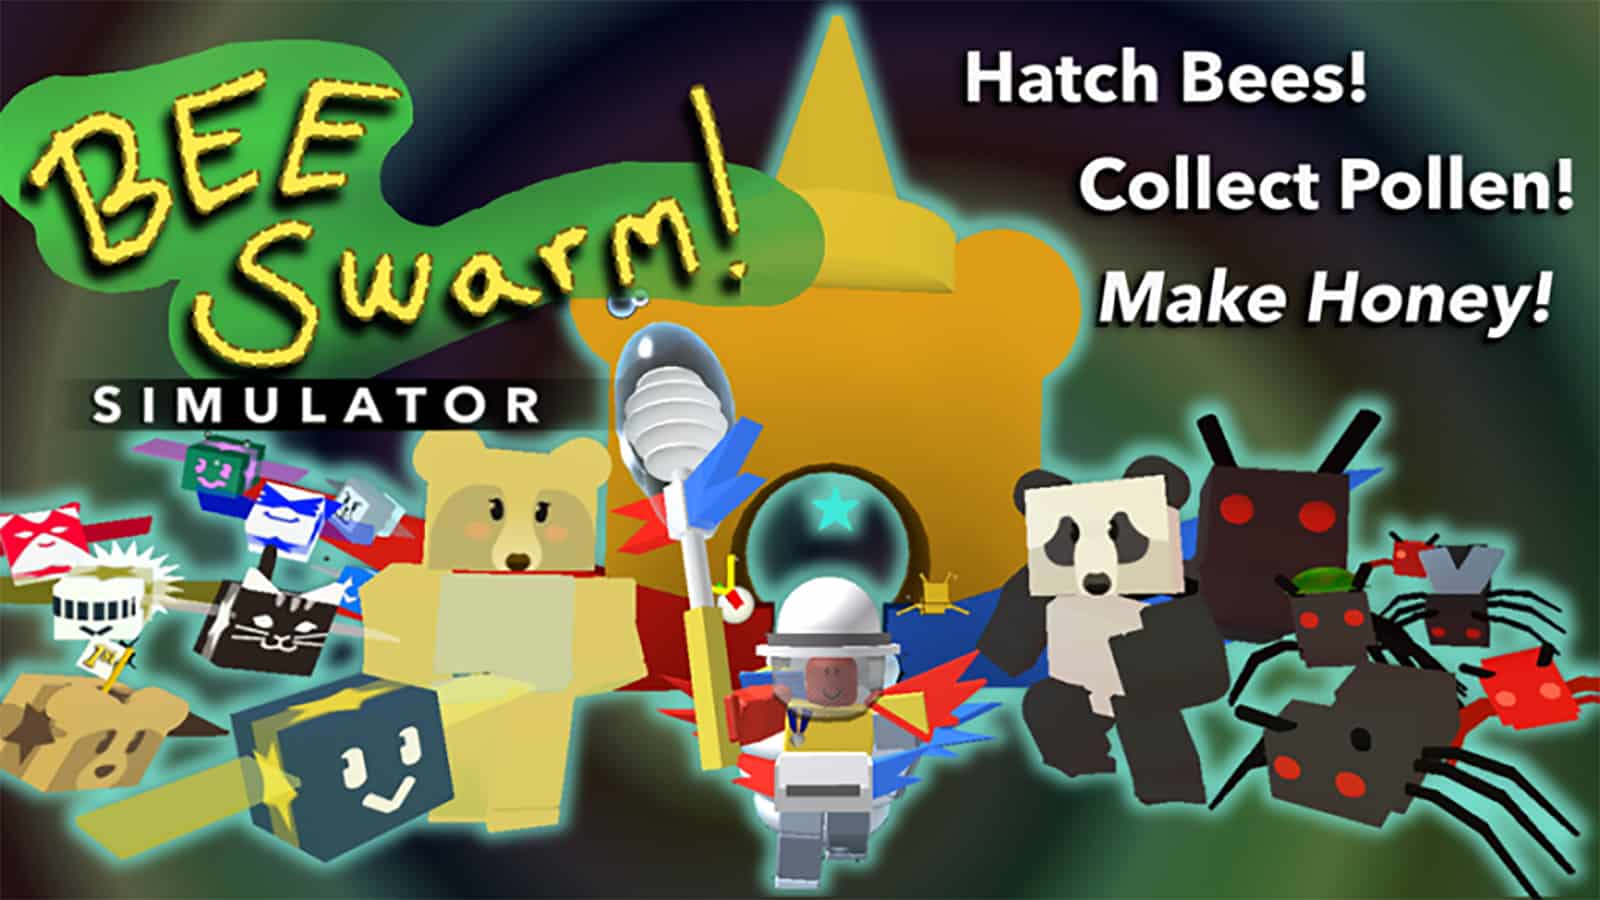 Bee Swarm Simulator artwork, featuring characters from the Roblox game